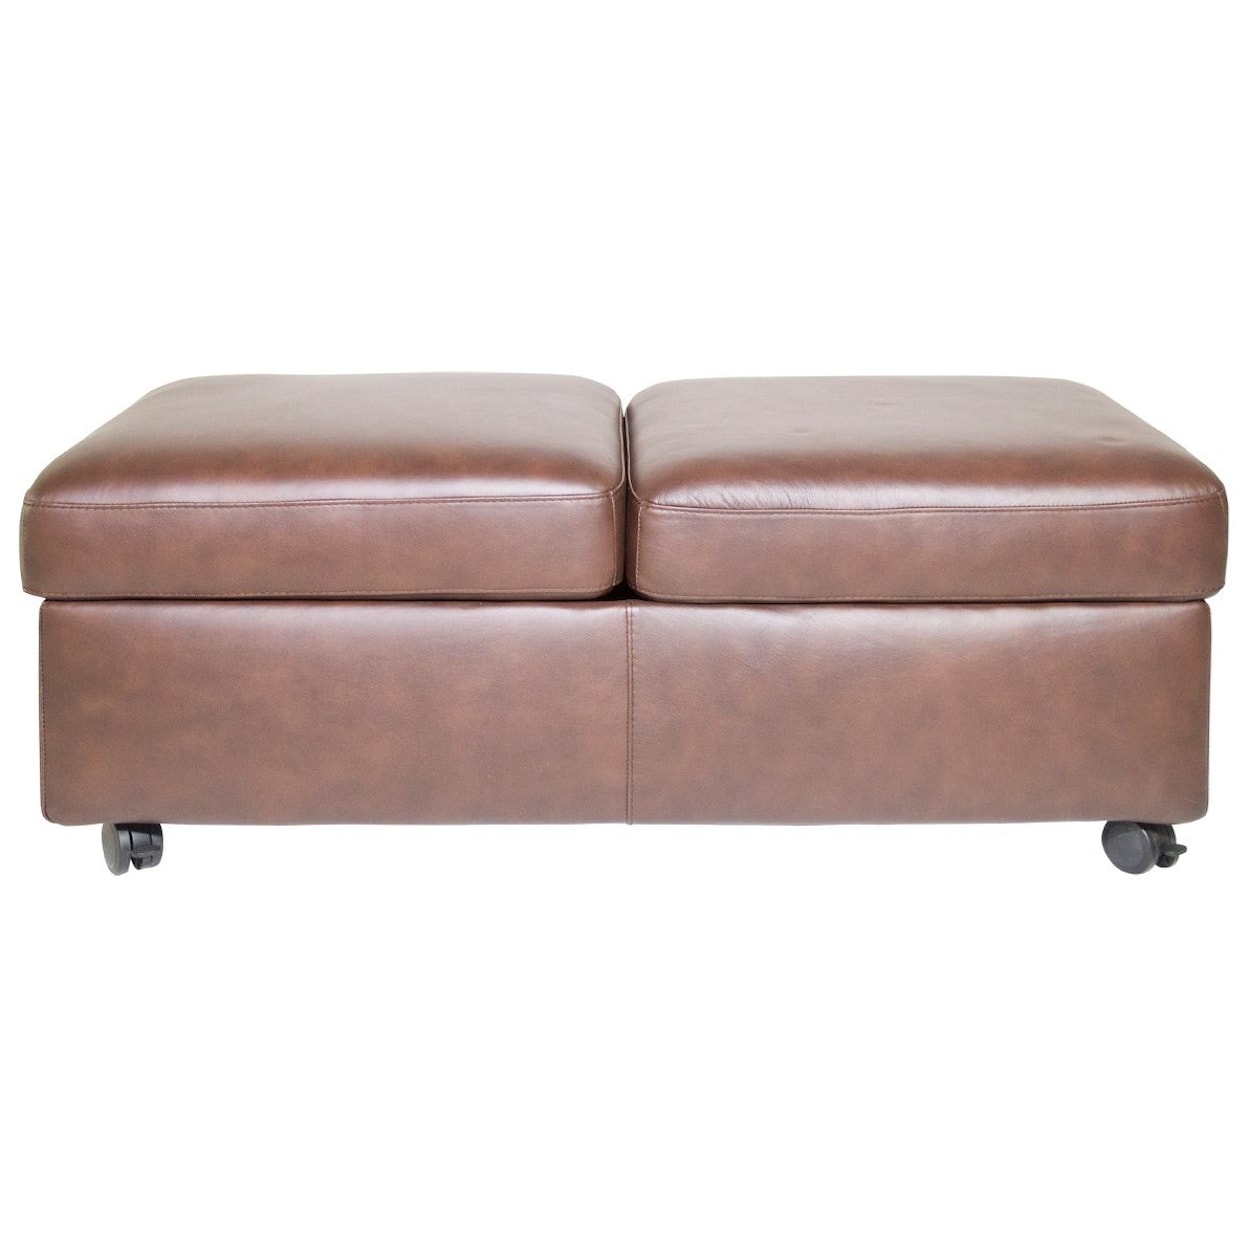 Stressless by Ekornes Wave Double Ottoman and Table